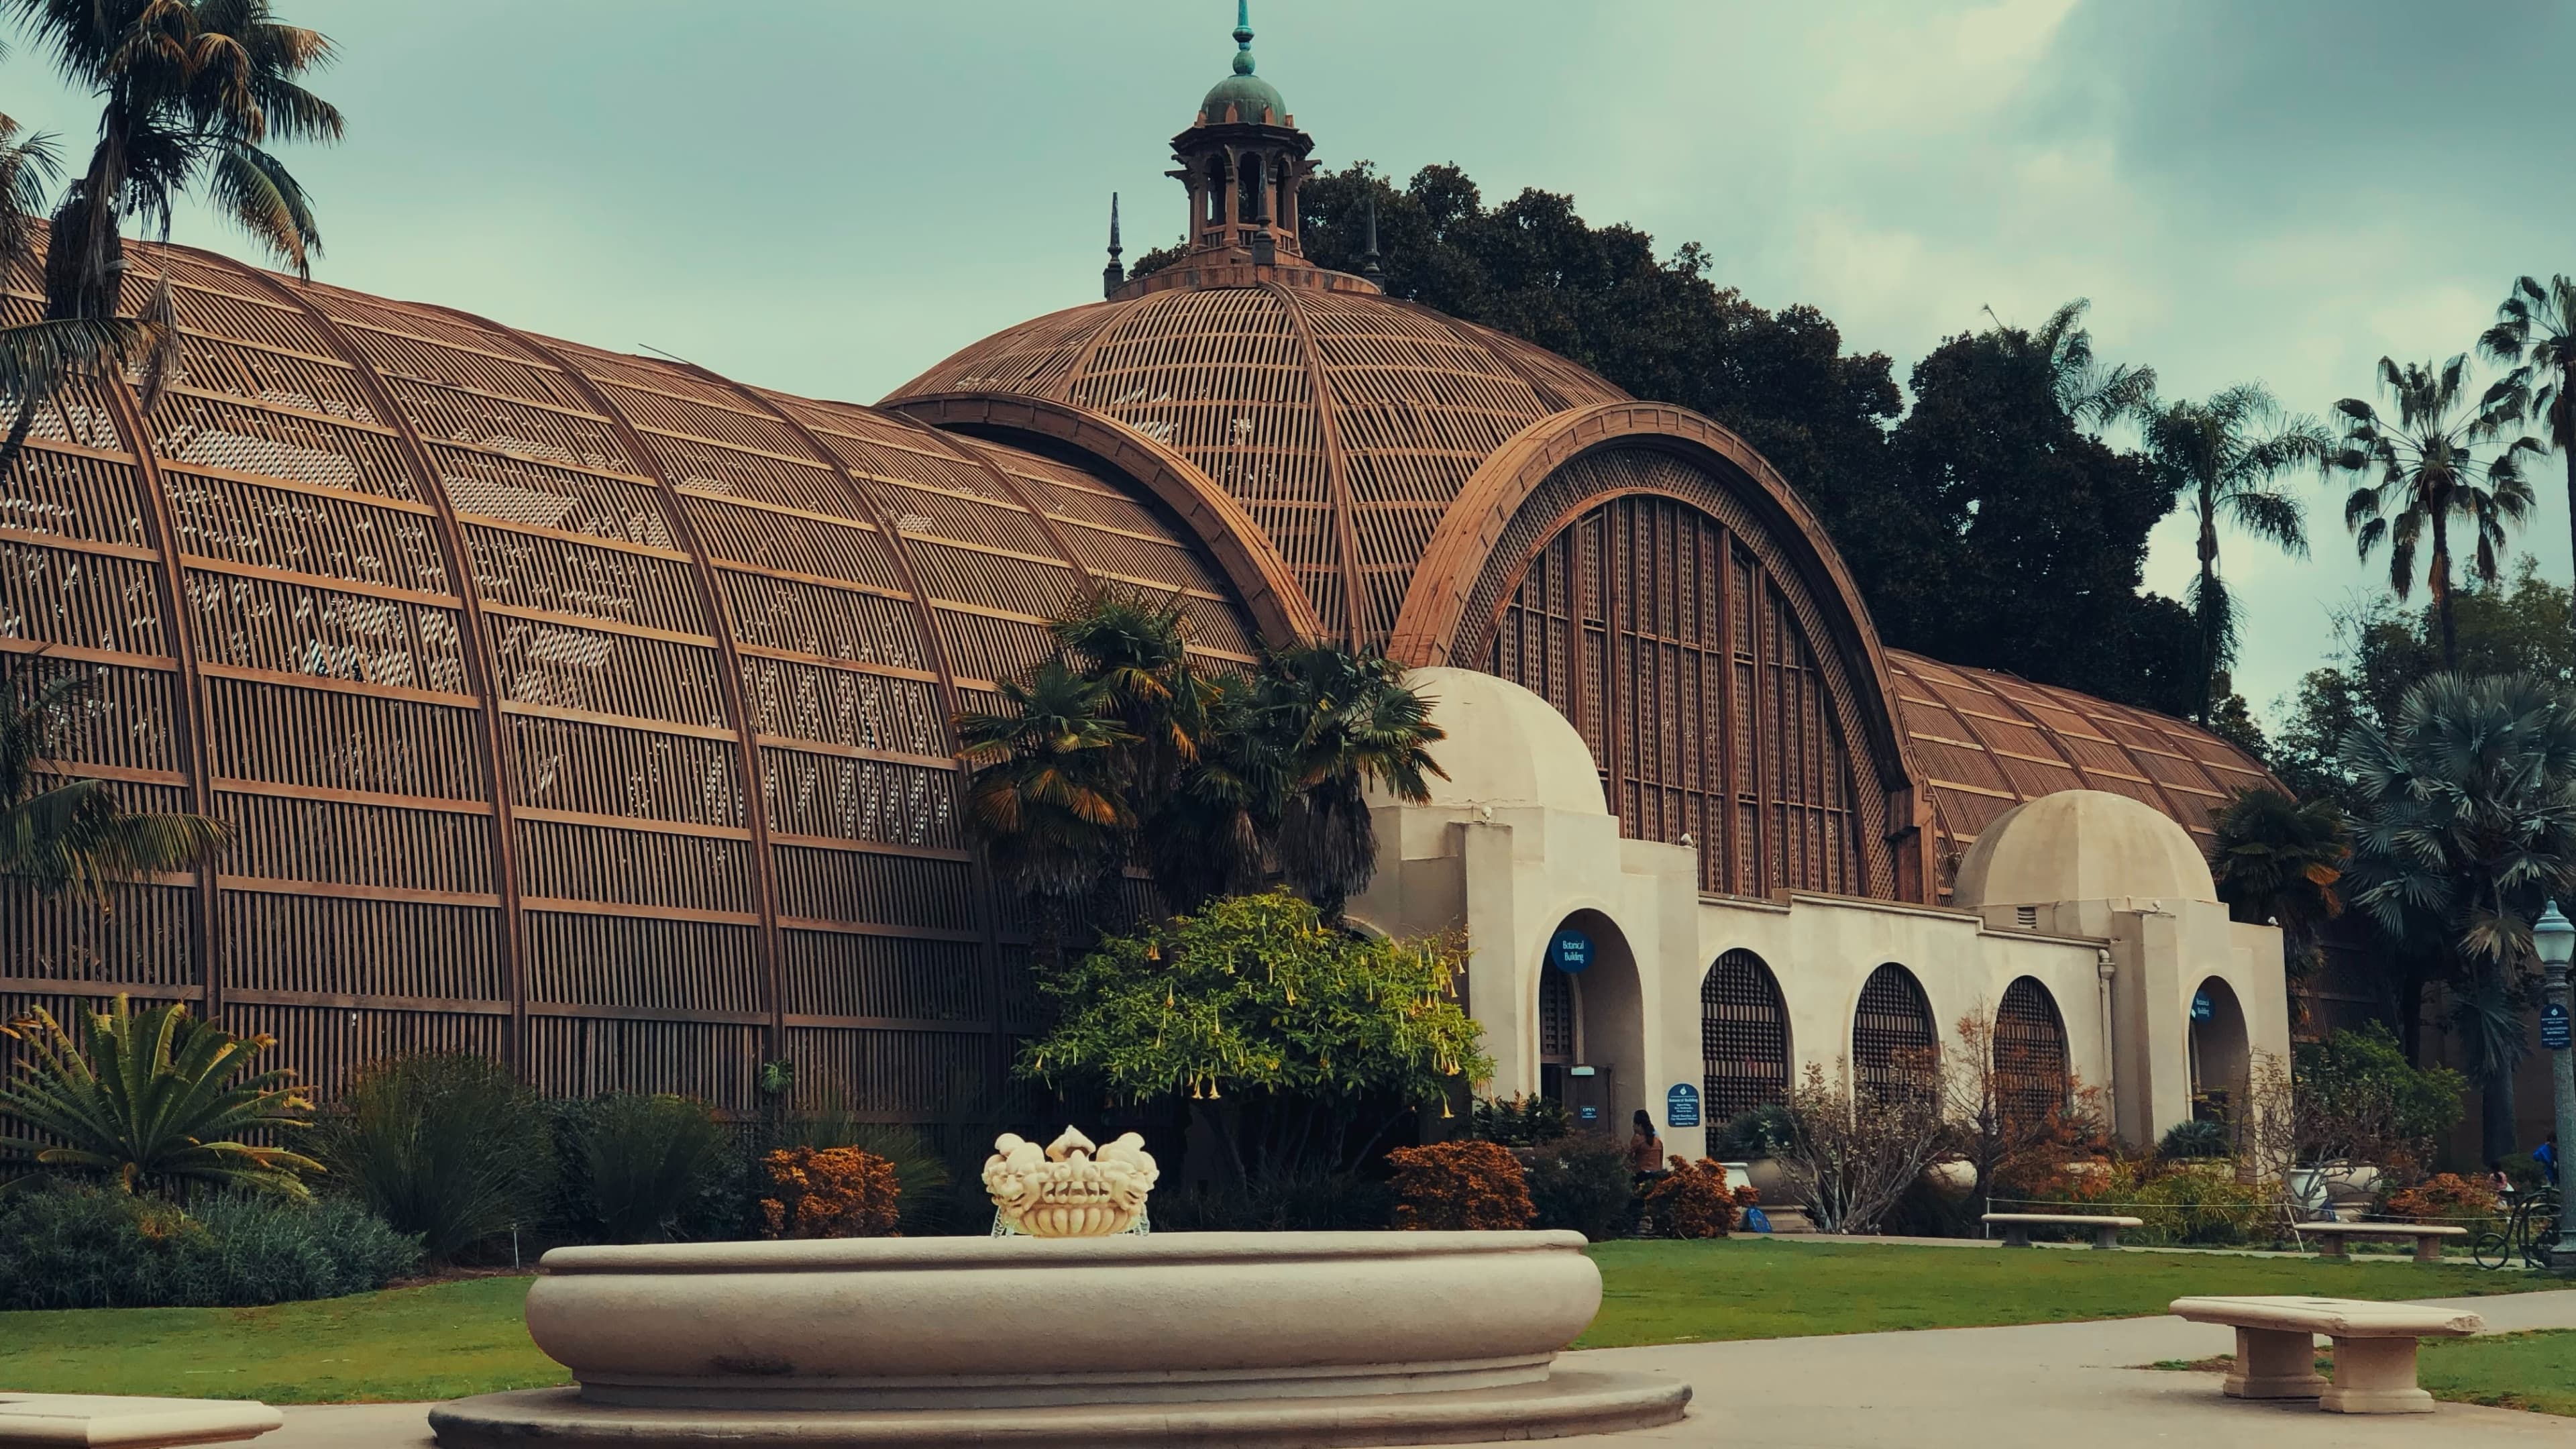 The iconic Balboa Park Botanical Building with blue sky and a fountain in the foreground